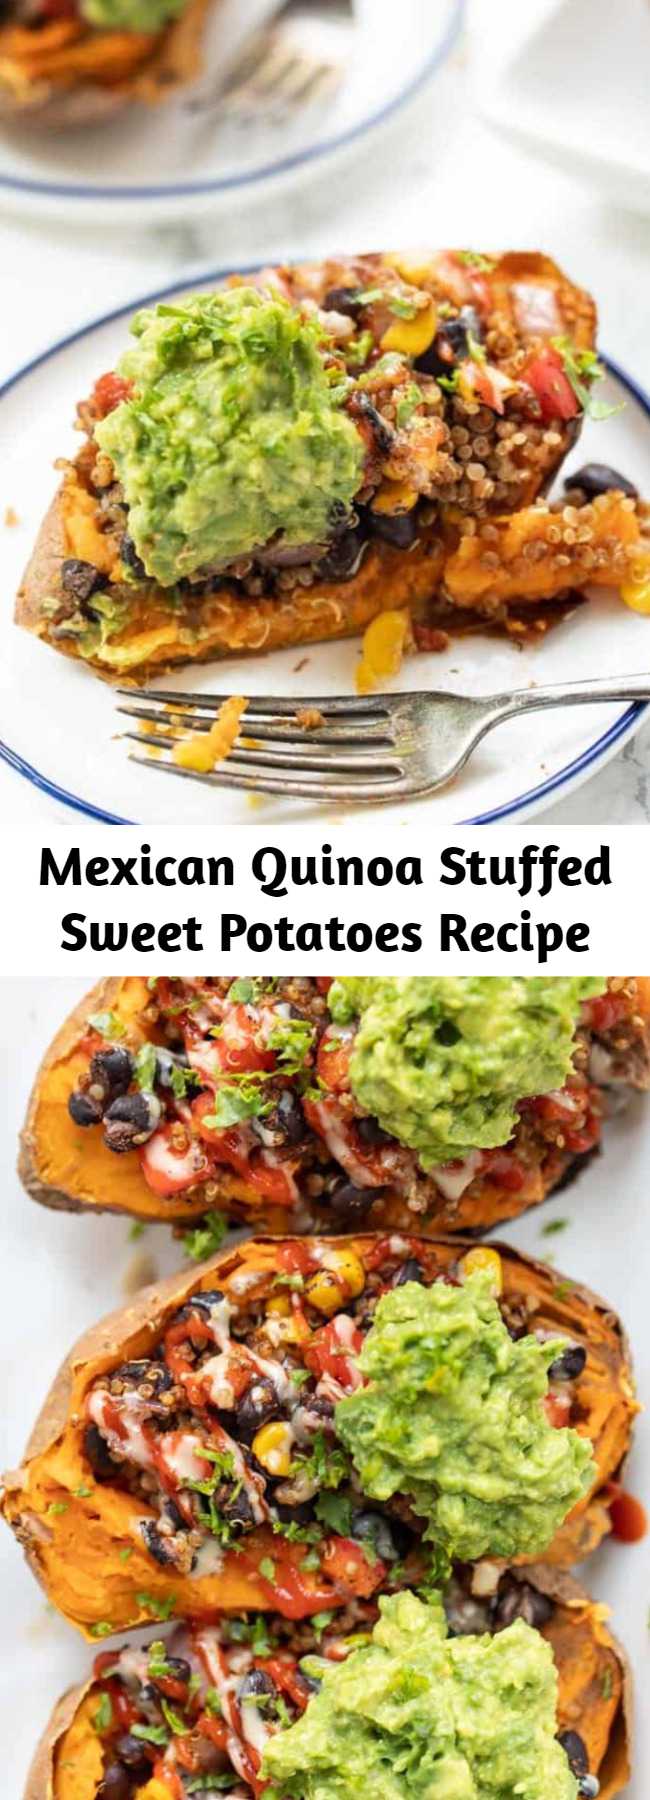 Mexican Quinoa Stuffed Sweet Potatoes Recipe - These Mexican Quinoa STUFFED Sweet Potatoes are the ultimate plant-based meal! Packed with fiber and protein, they're filling, tasty and easy to make! Easy, healthy and so delicious. Stuffed with black beans, quinoa, guacamole, and more healthy ingredients! #stuffedsweetpotatoes #mexicanquinoa #quinoa #quinoarecipe #vegandinner